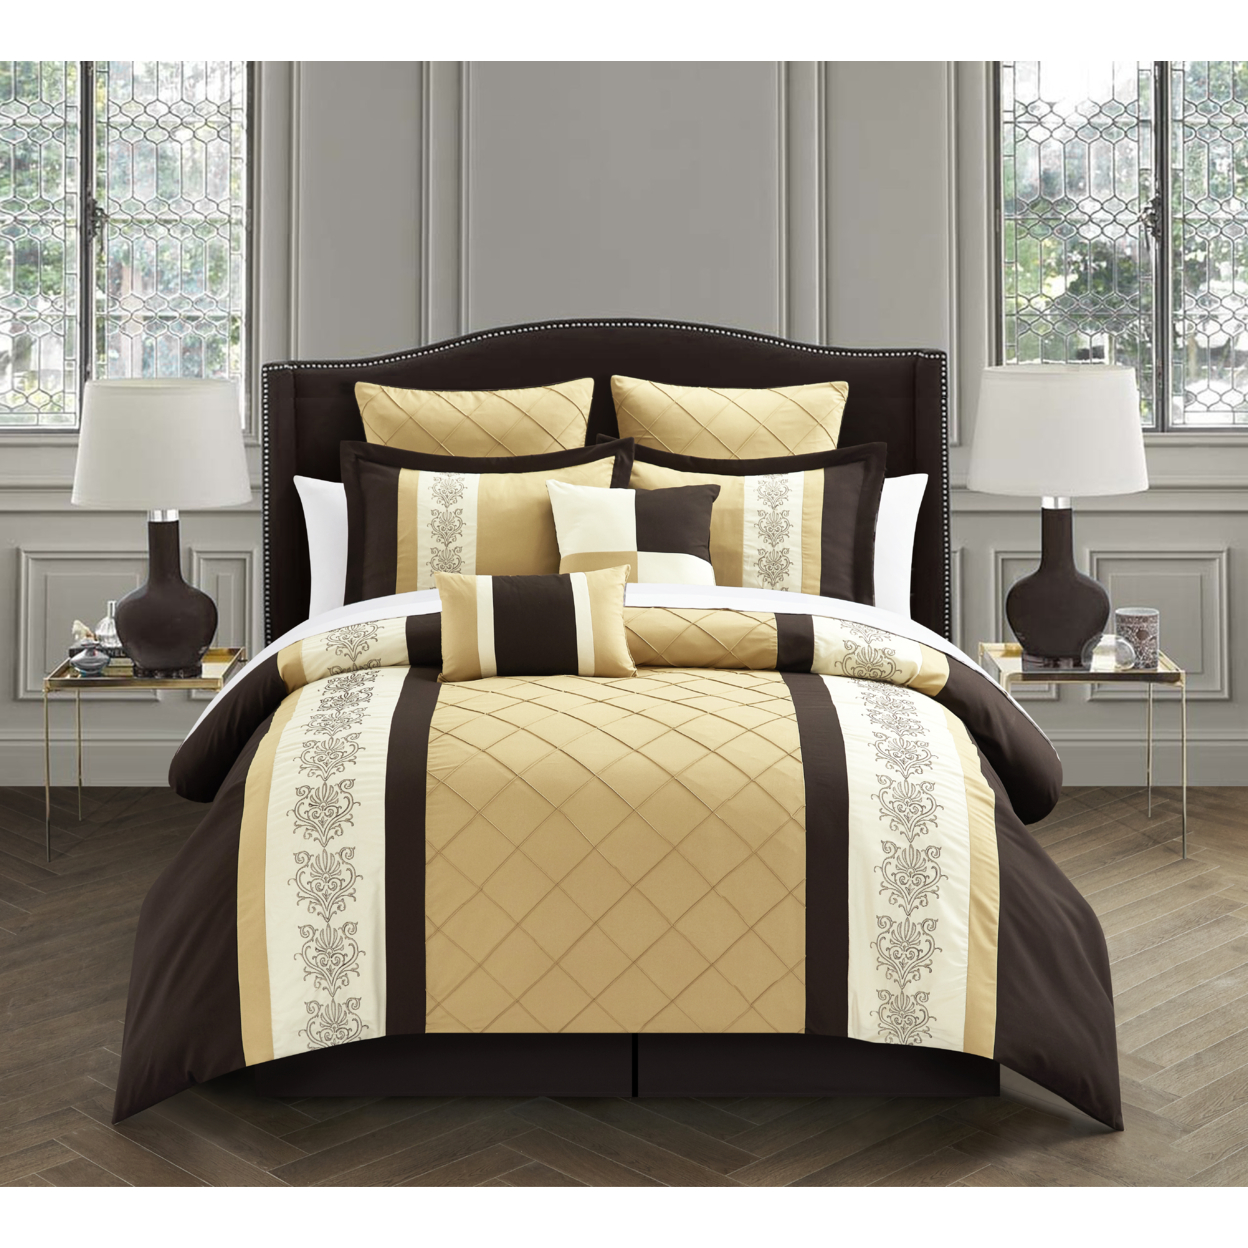 Livingston Oversized And Overfilled Comforter Set (8-Piece) - Gold, King